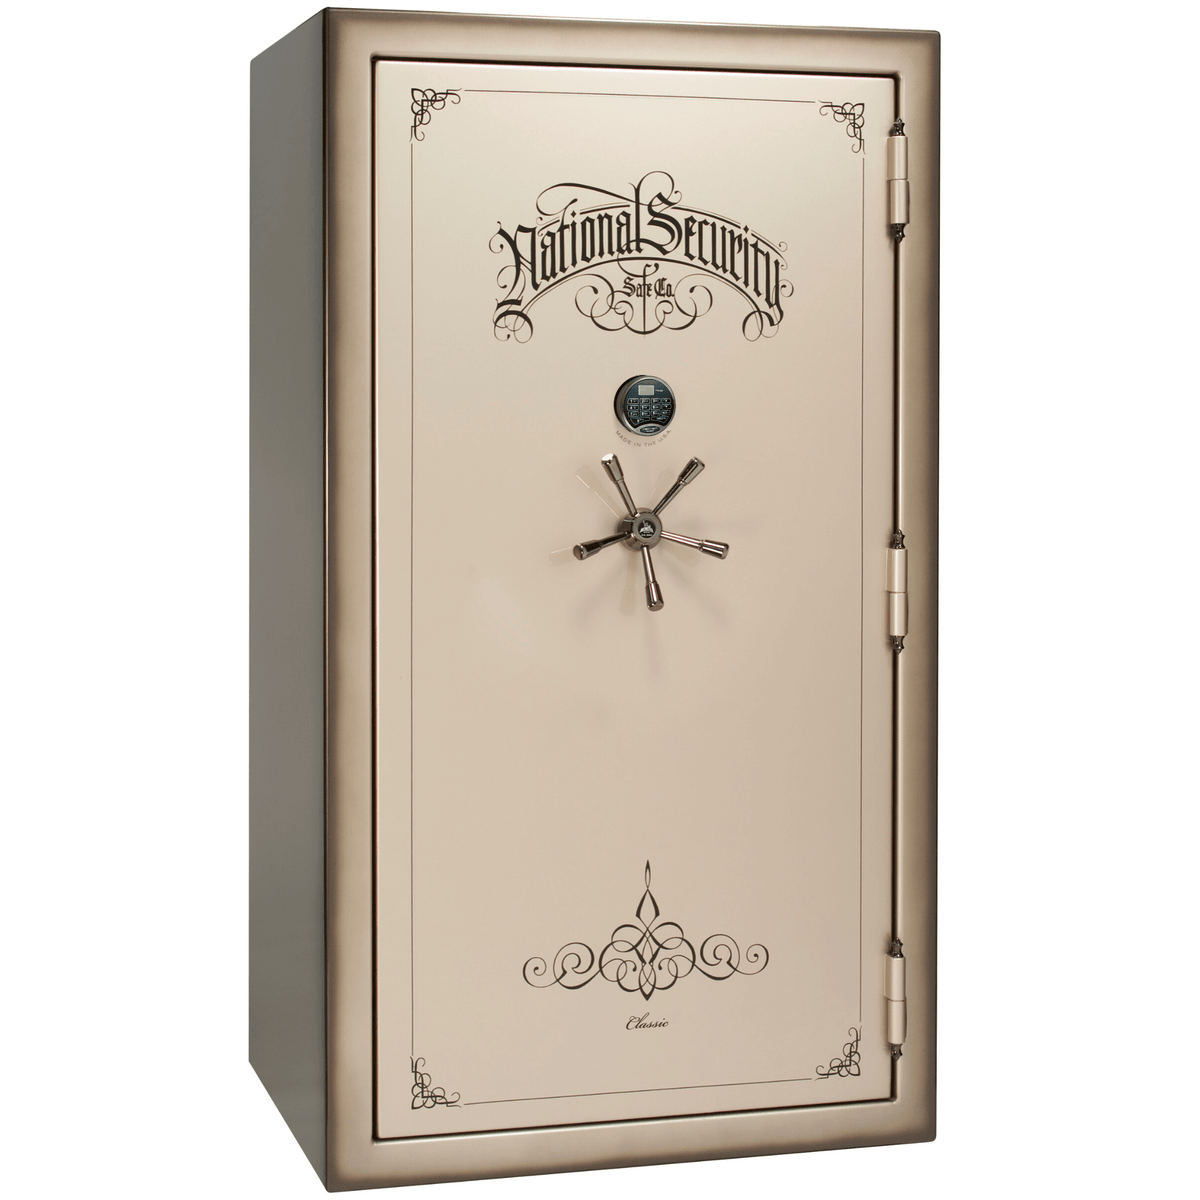 Liberty Safe Classic Plus 50 in Feathered Champagne Gloss with Black Chrome Electronic Lock, closed door.